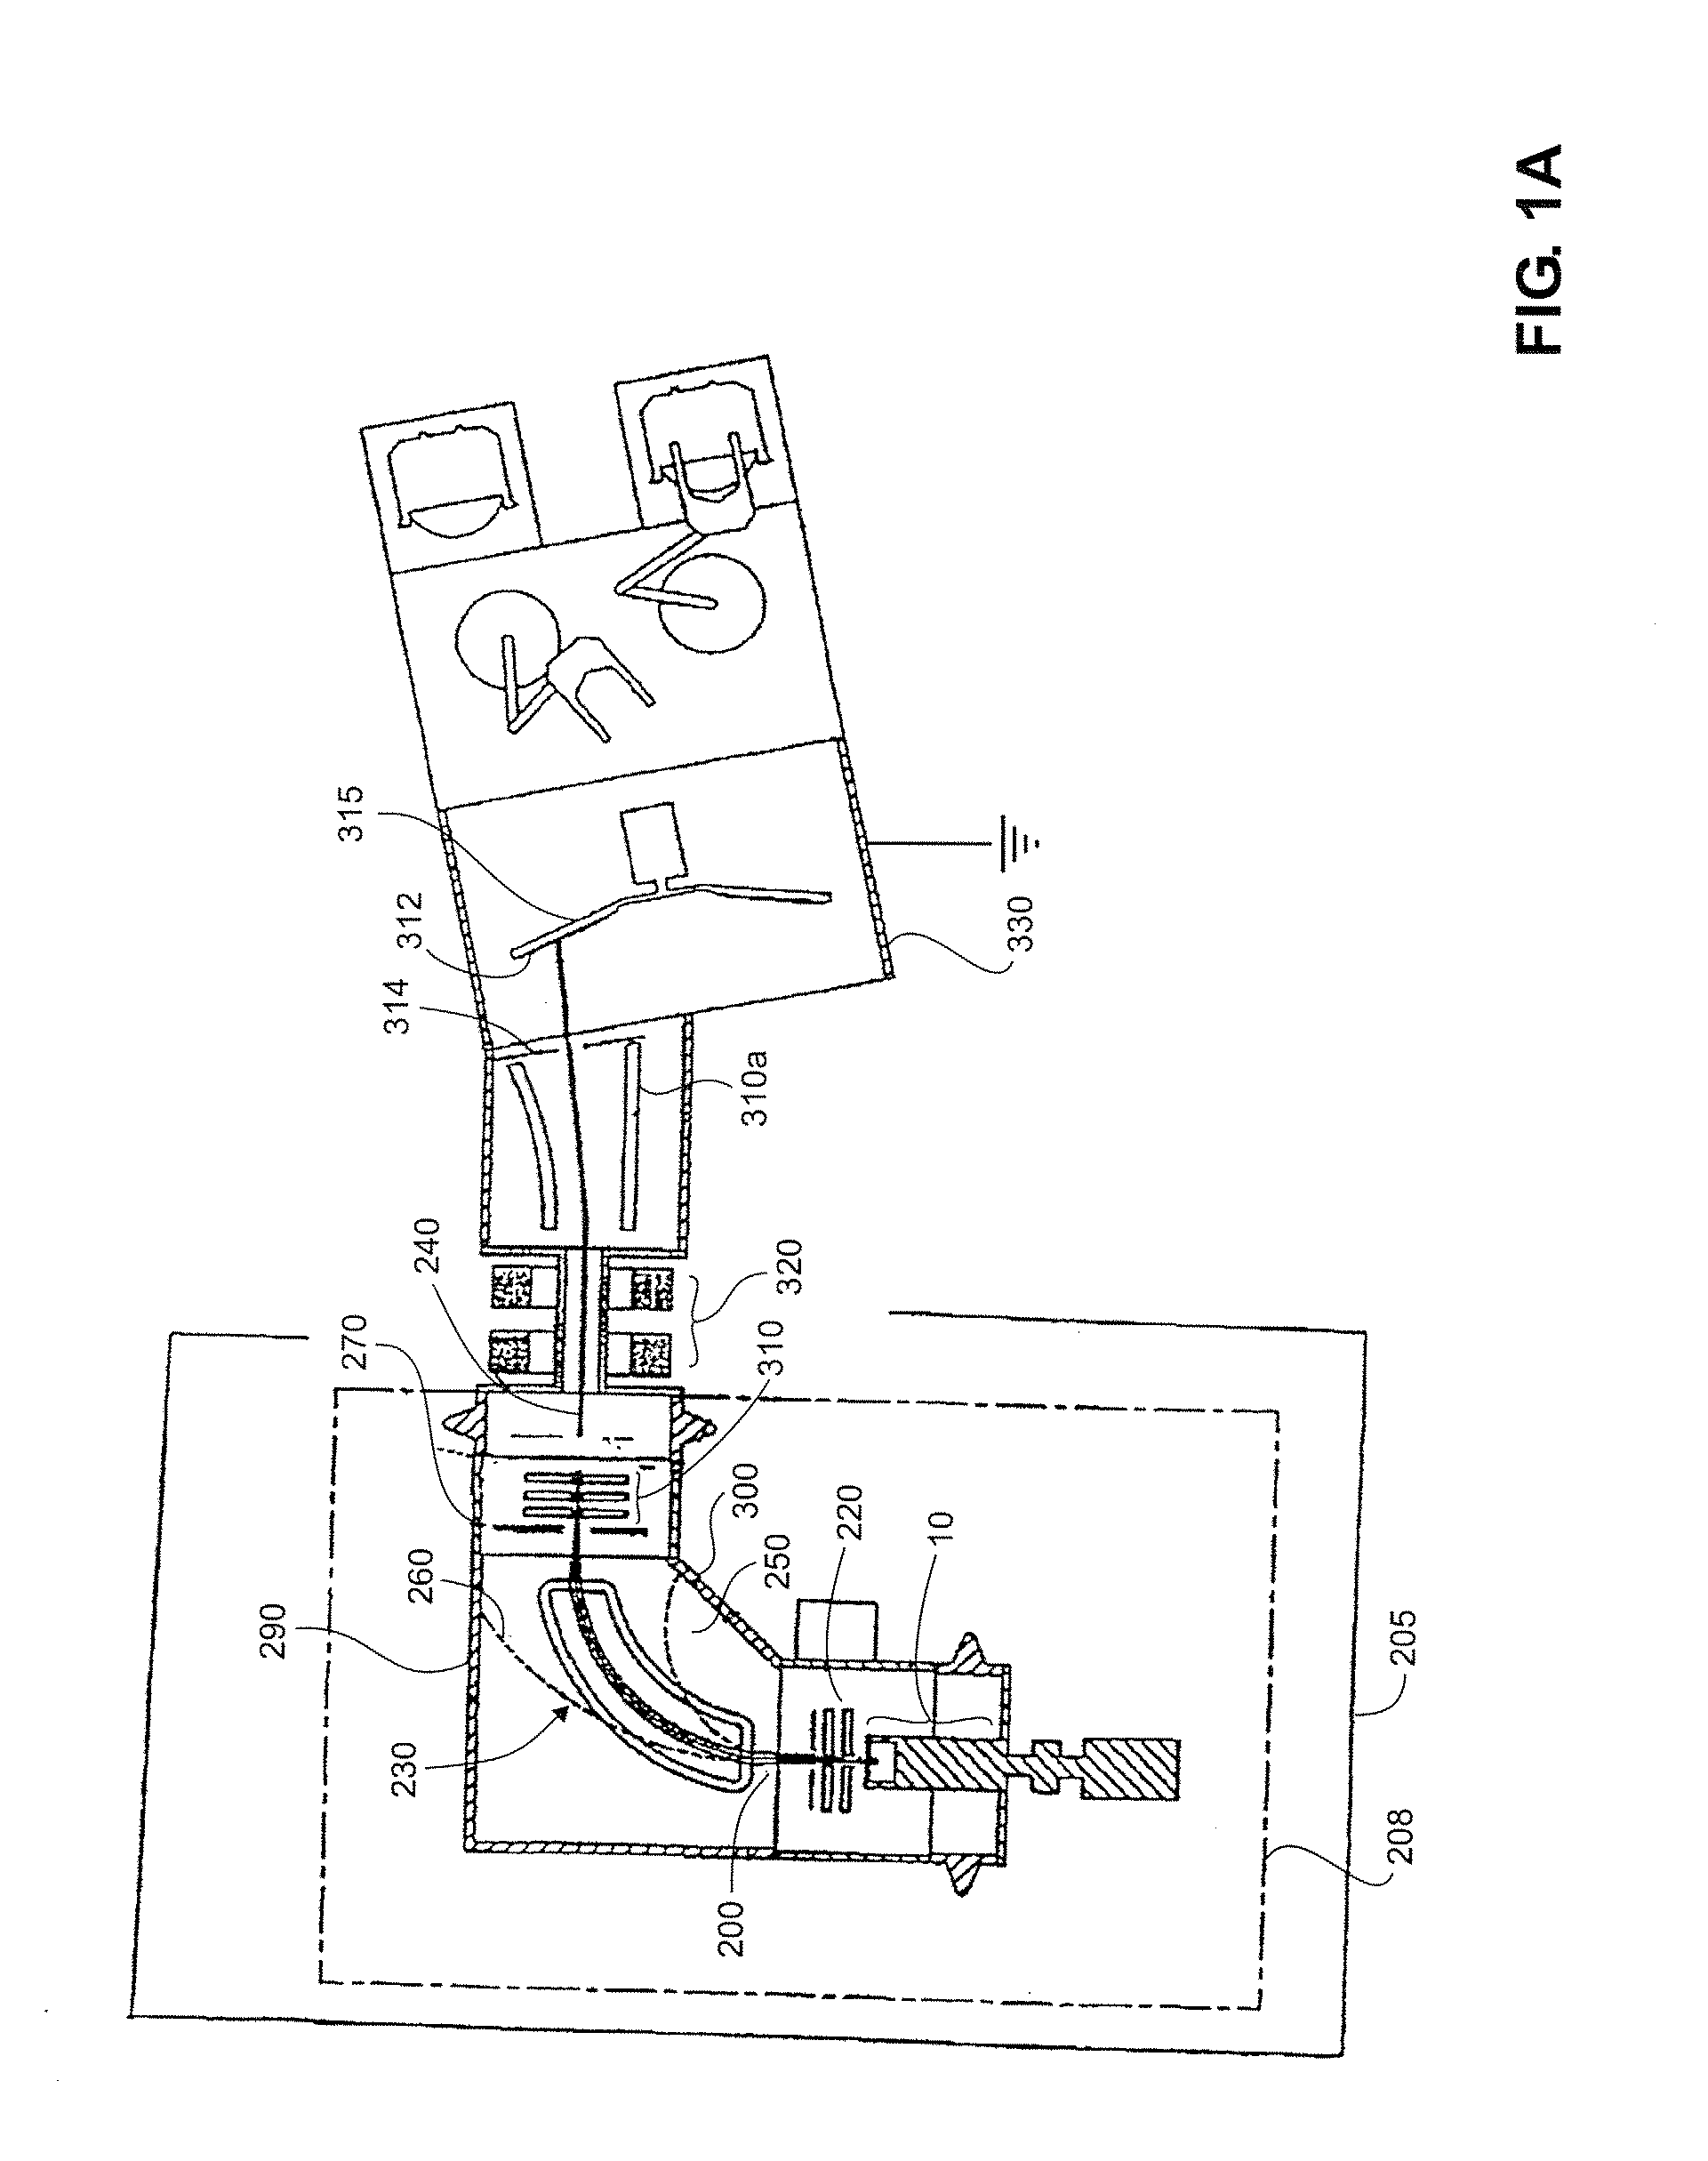 Ion implantation device and a method of semiconductor manufacturing by the implantation of boron hydride cluster ions